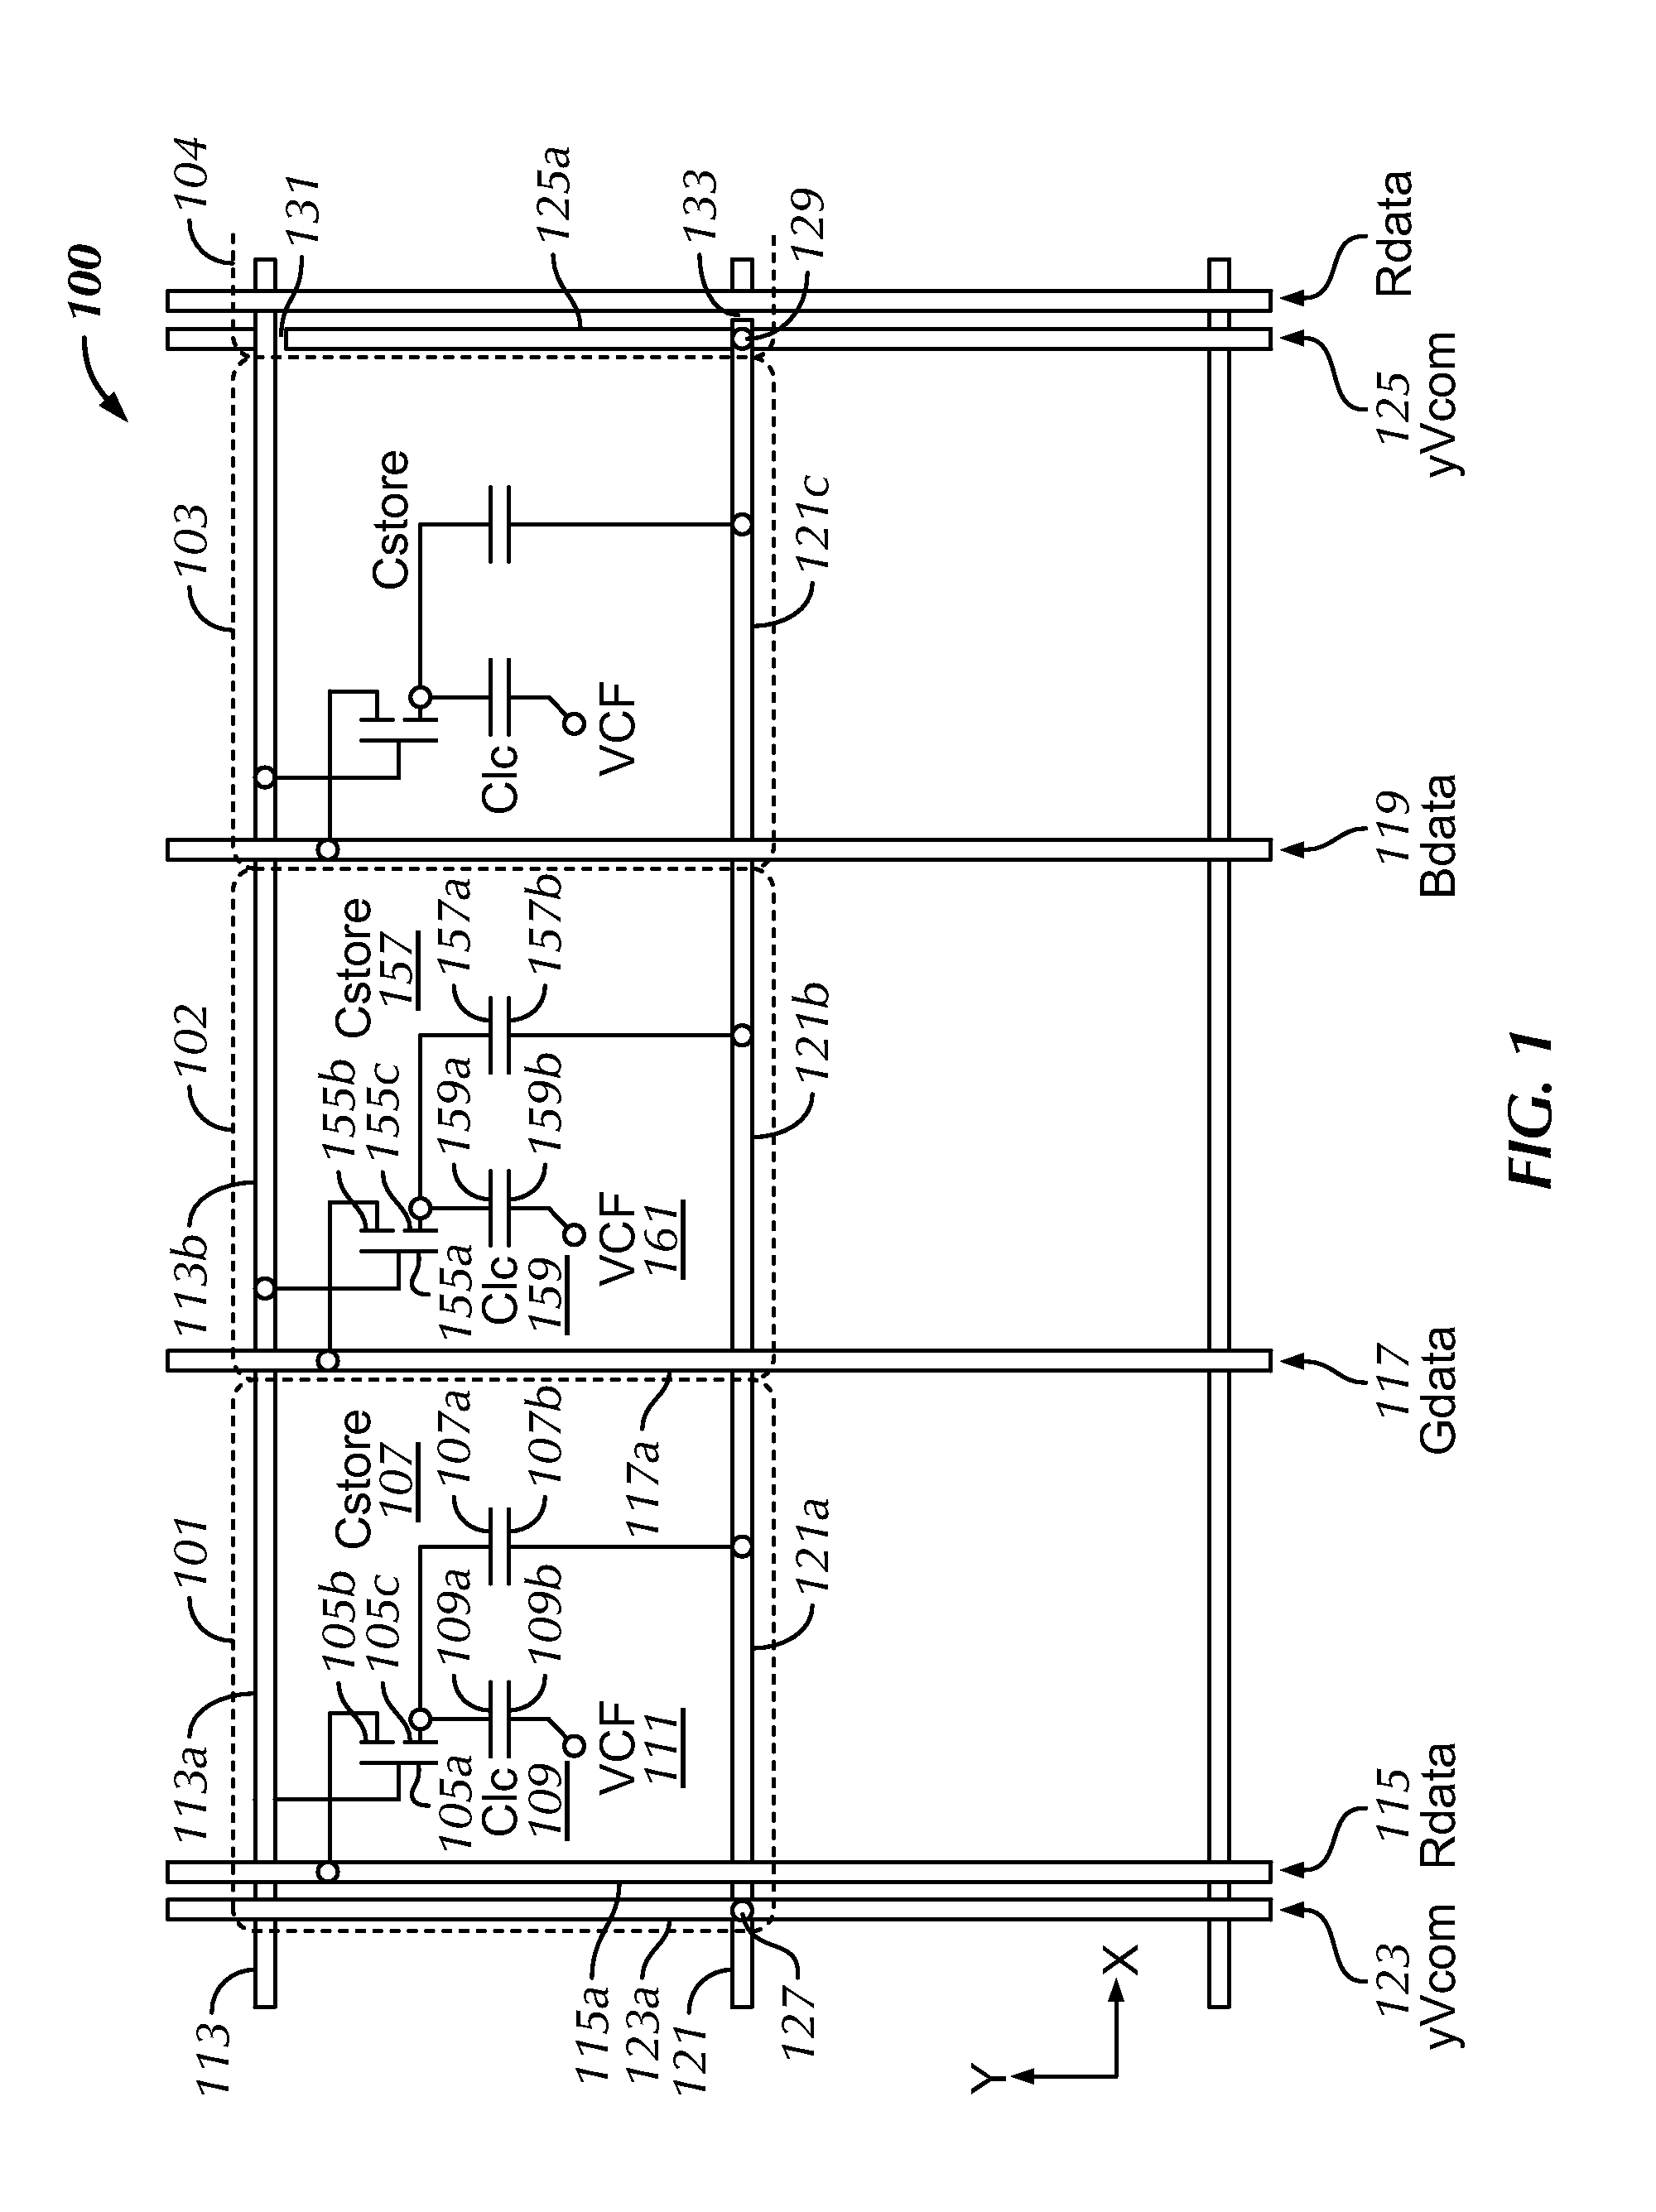 Display with dual-function capacitive elements